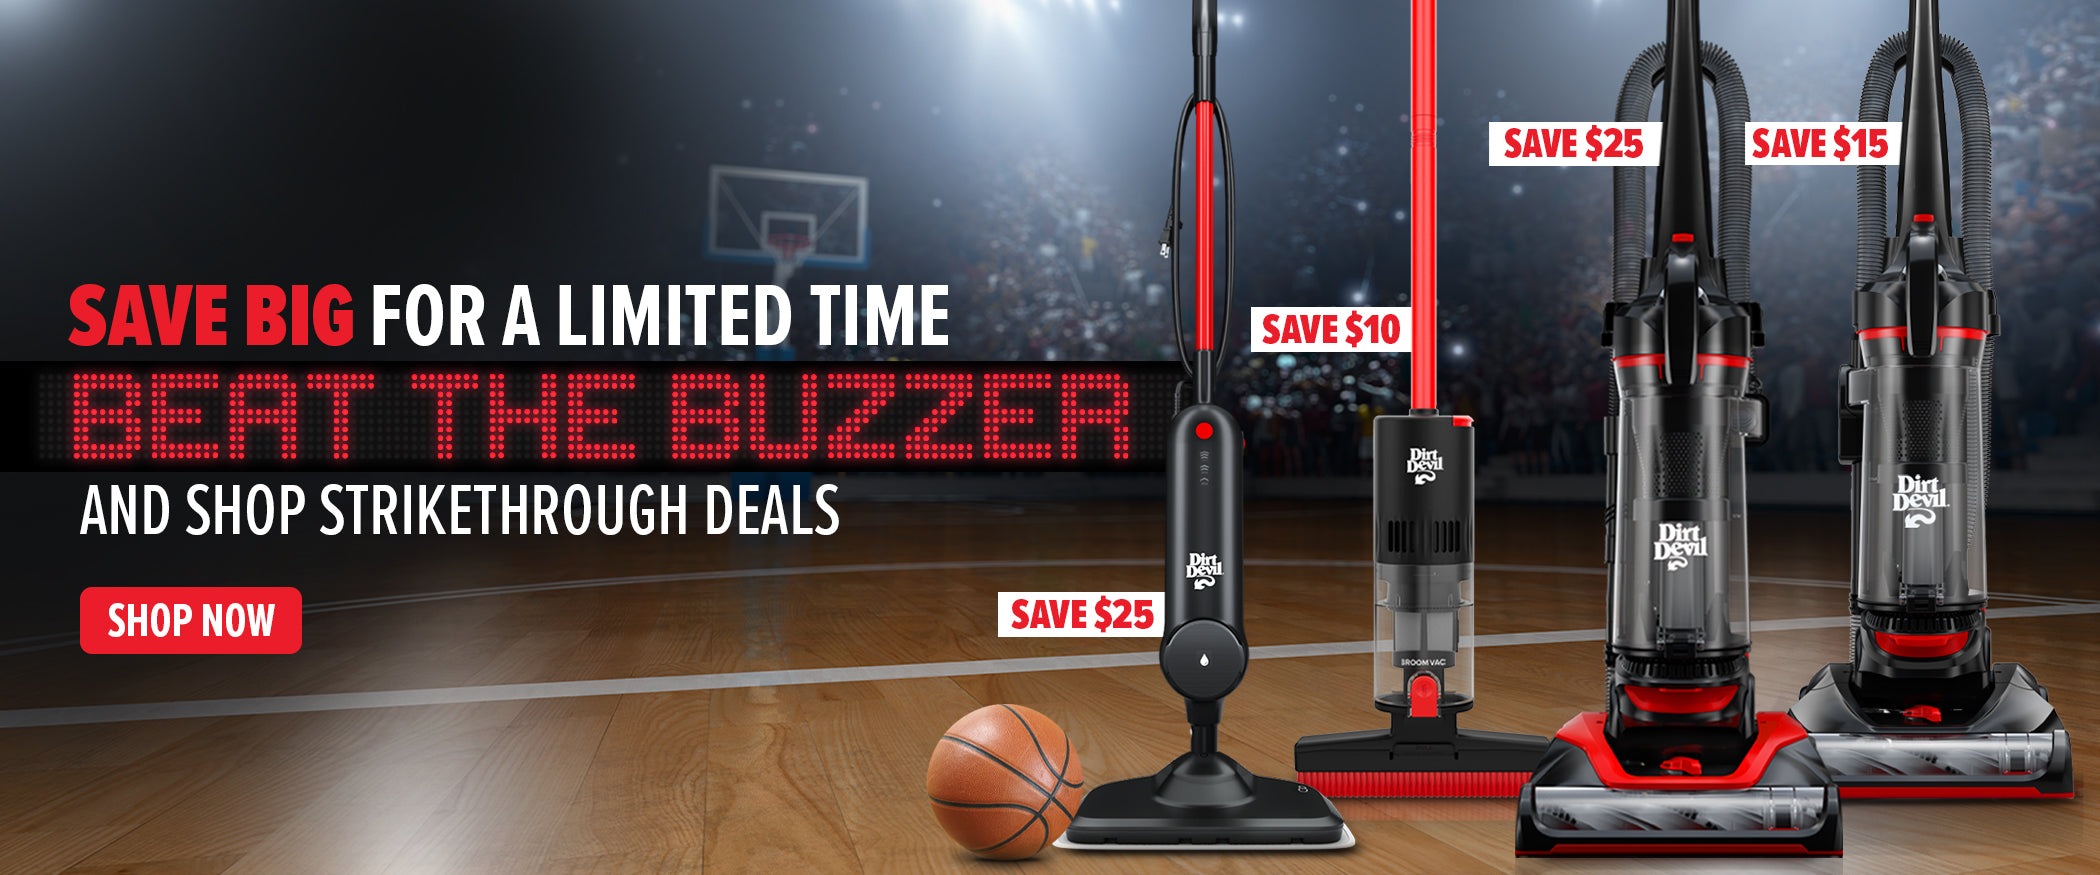 Beat the buzzer promotional banner with steam mop, broom vac, multi-surface+, and multi-surface extended reach on a basketball court.